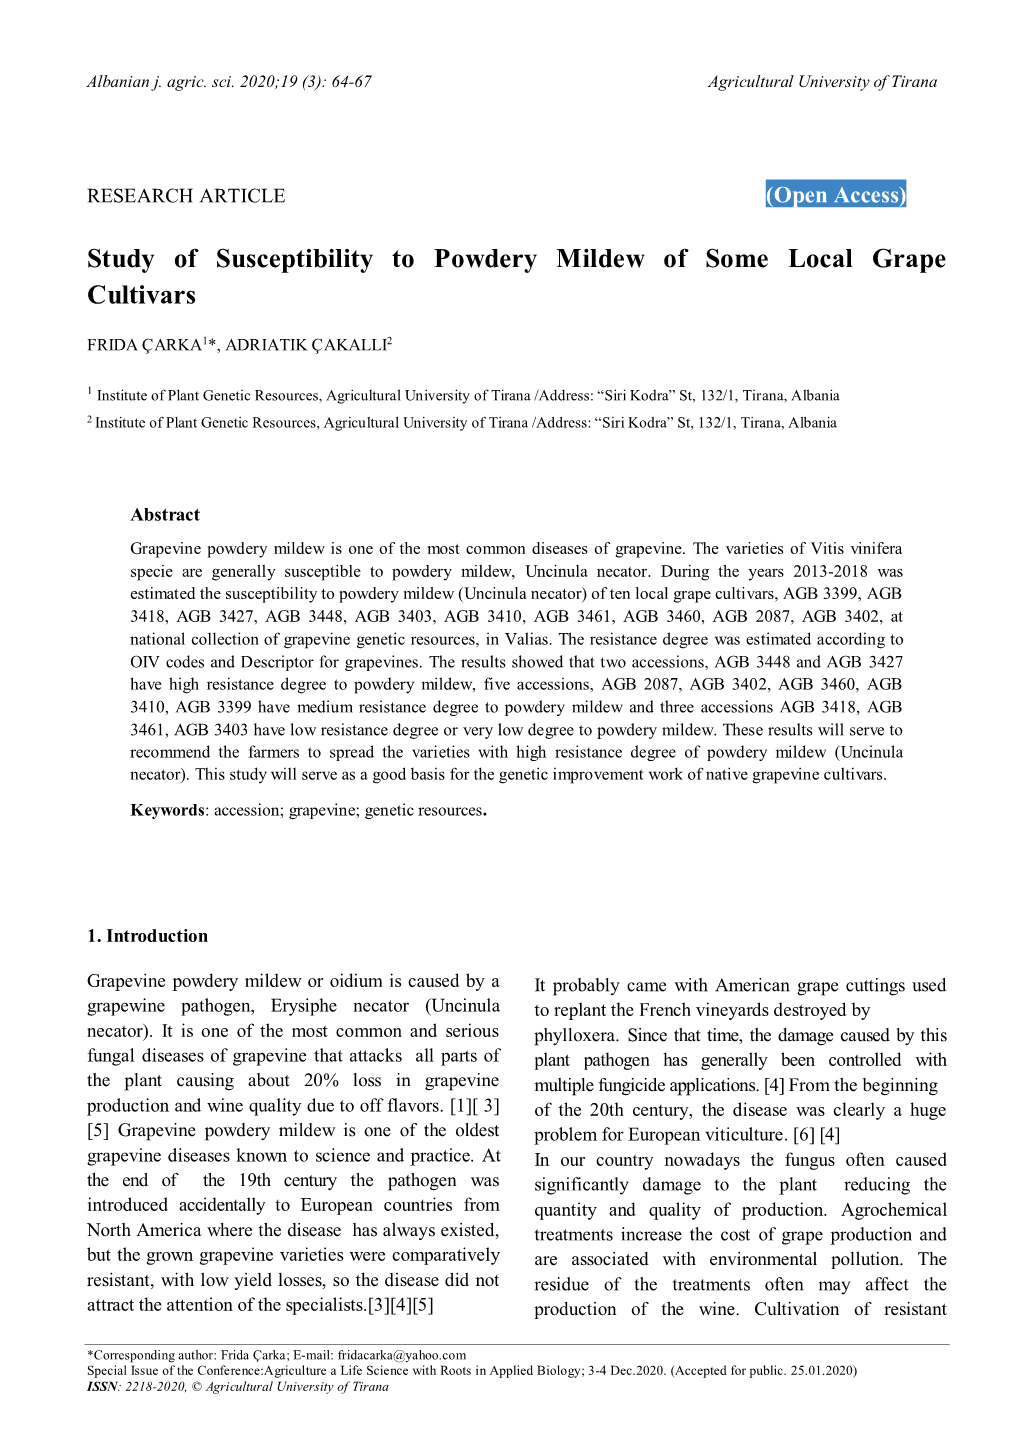 Study of Susceptibility to Powdery Mildew of Some Local Grape Cultivars